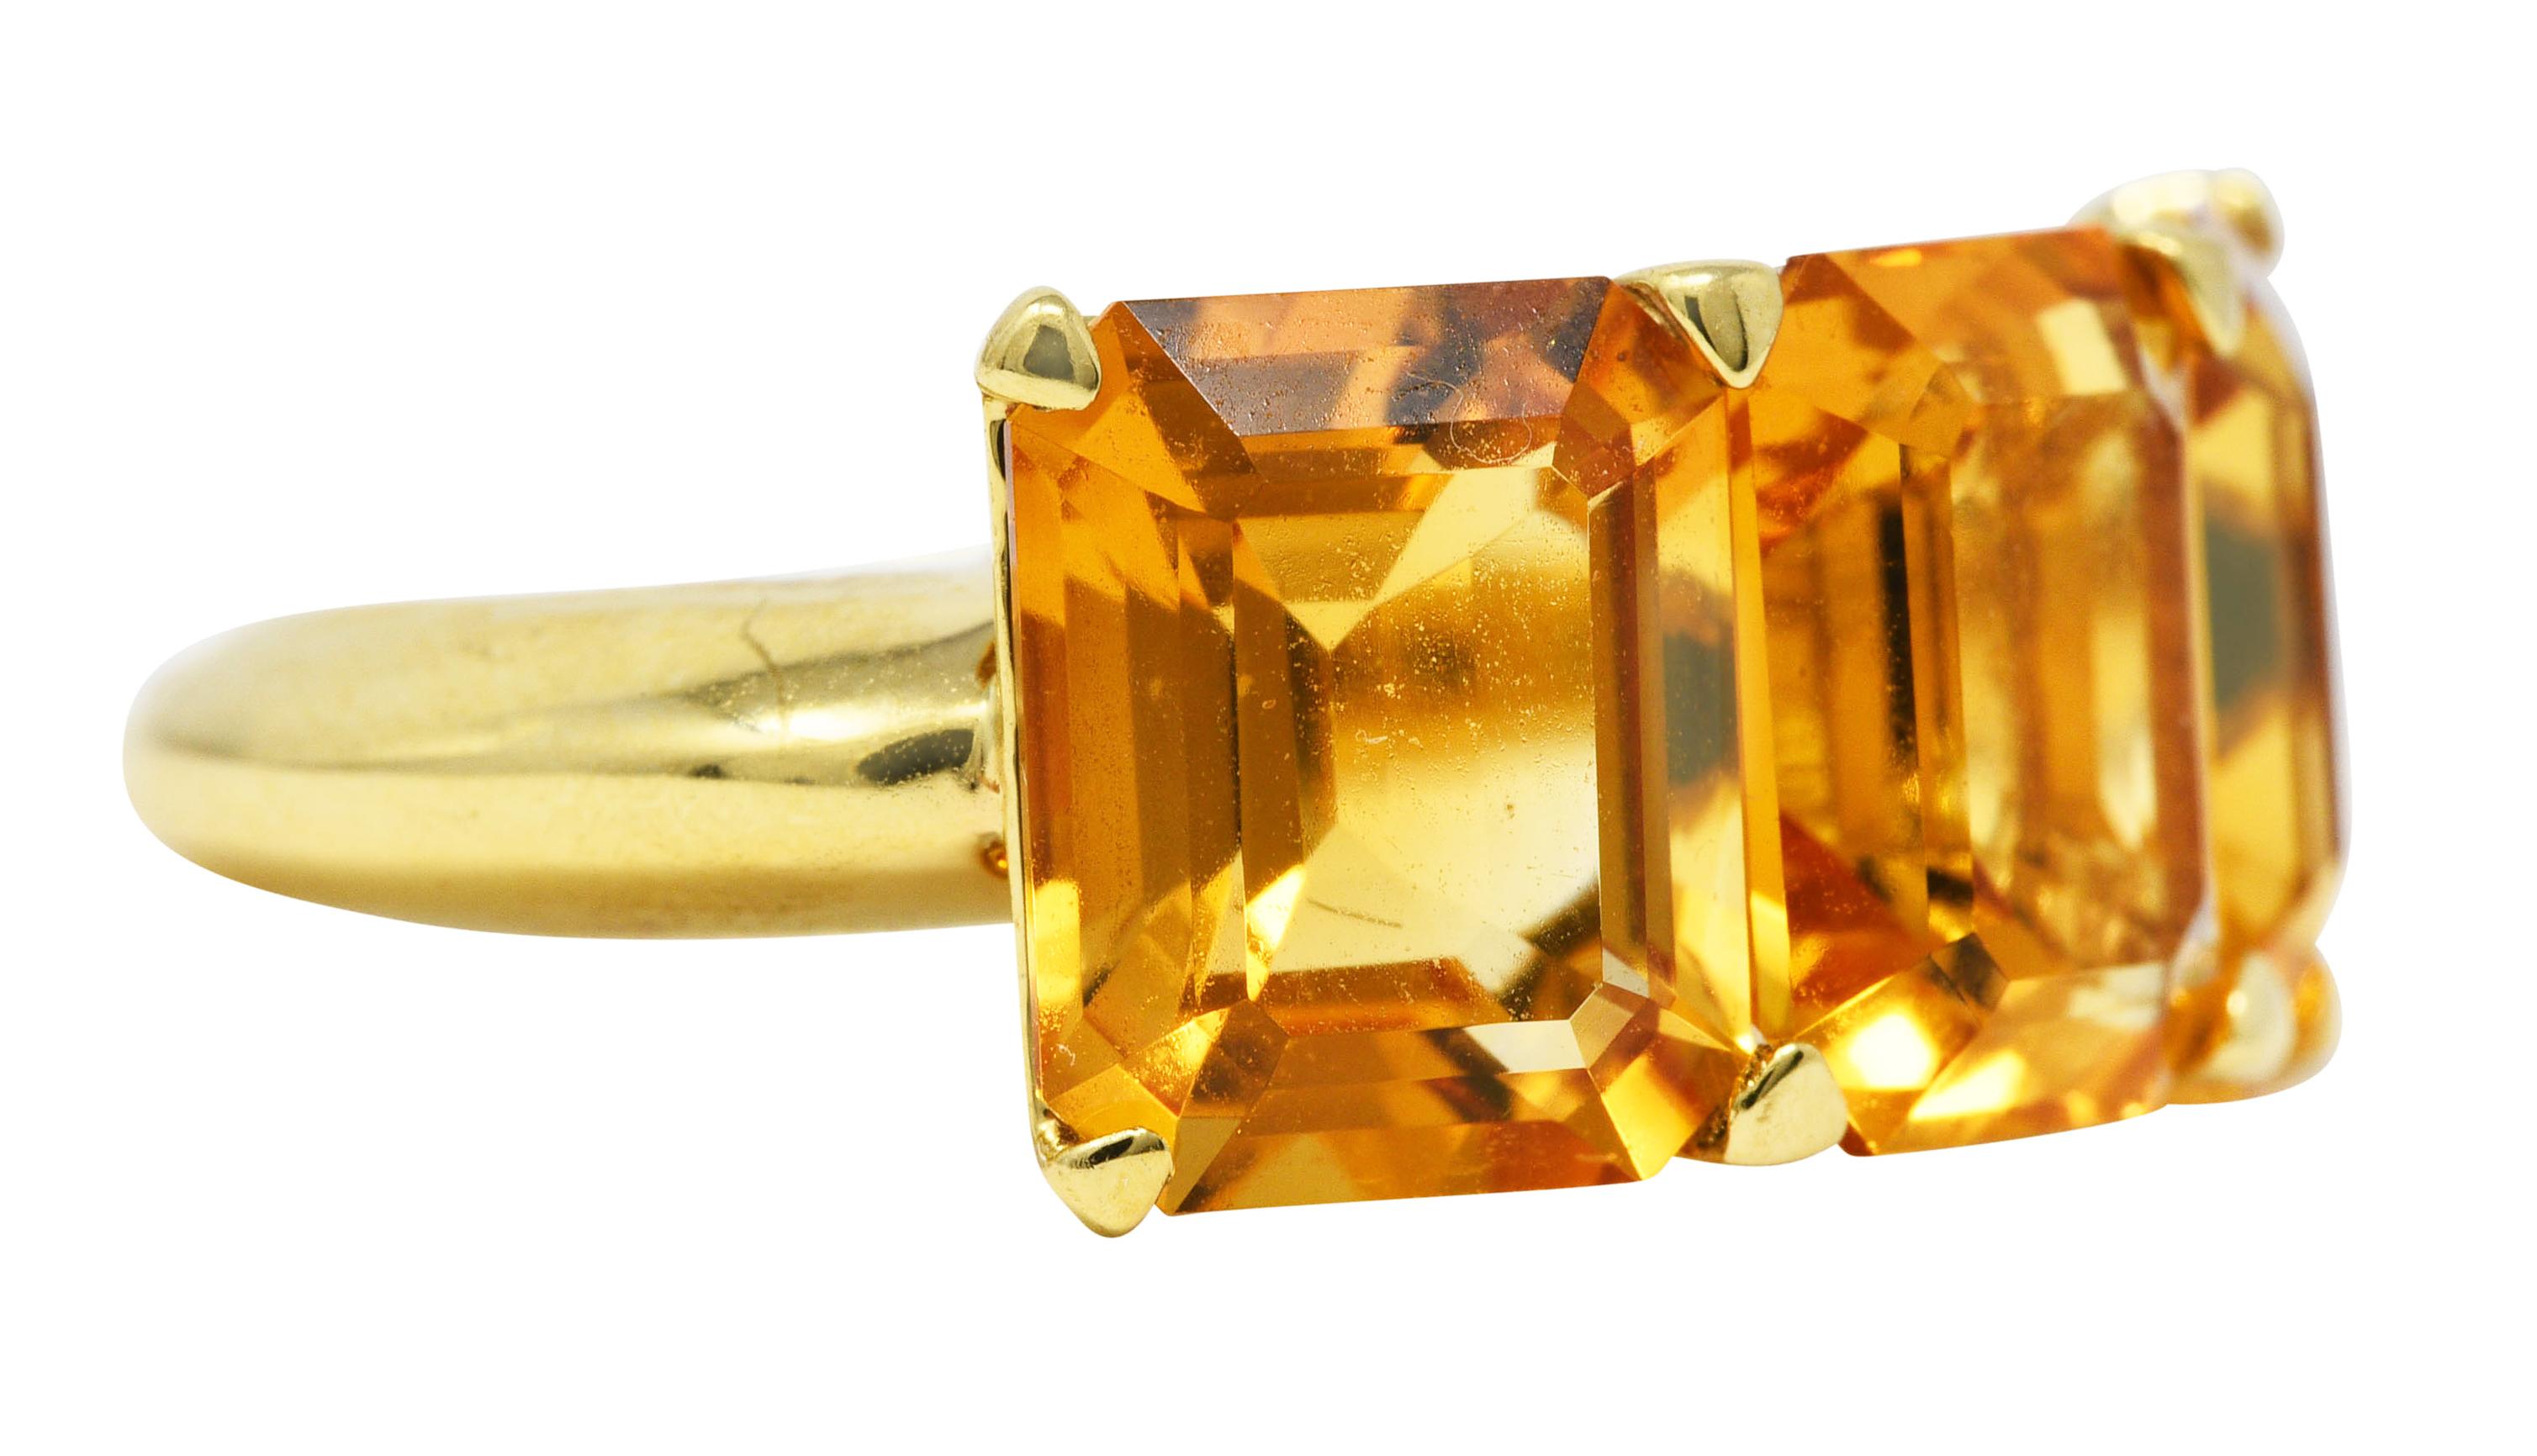 Ring features three basket set and emerald cut citrines. Eye clean and very well matched in yellowish orange color - medium saturation. Each measuring approximately 10.0 x 8.0 mm. Completed by a polished gold knife edge shank. Stamped 750 for 18